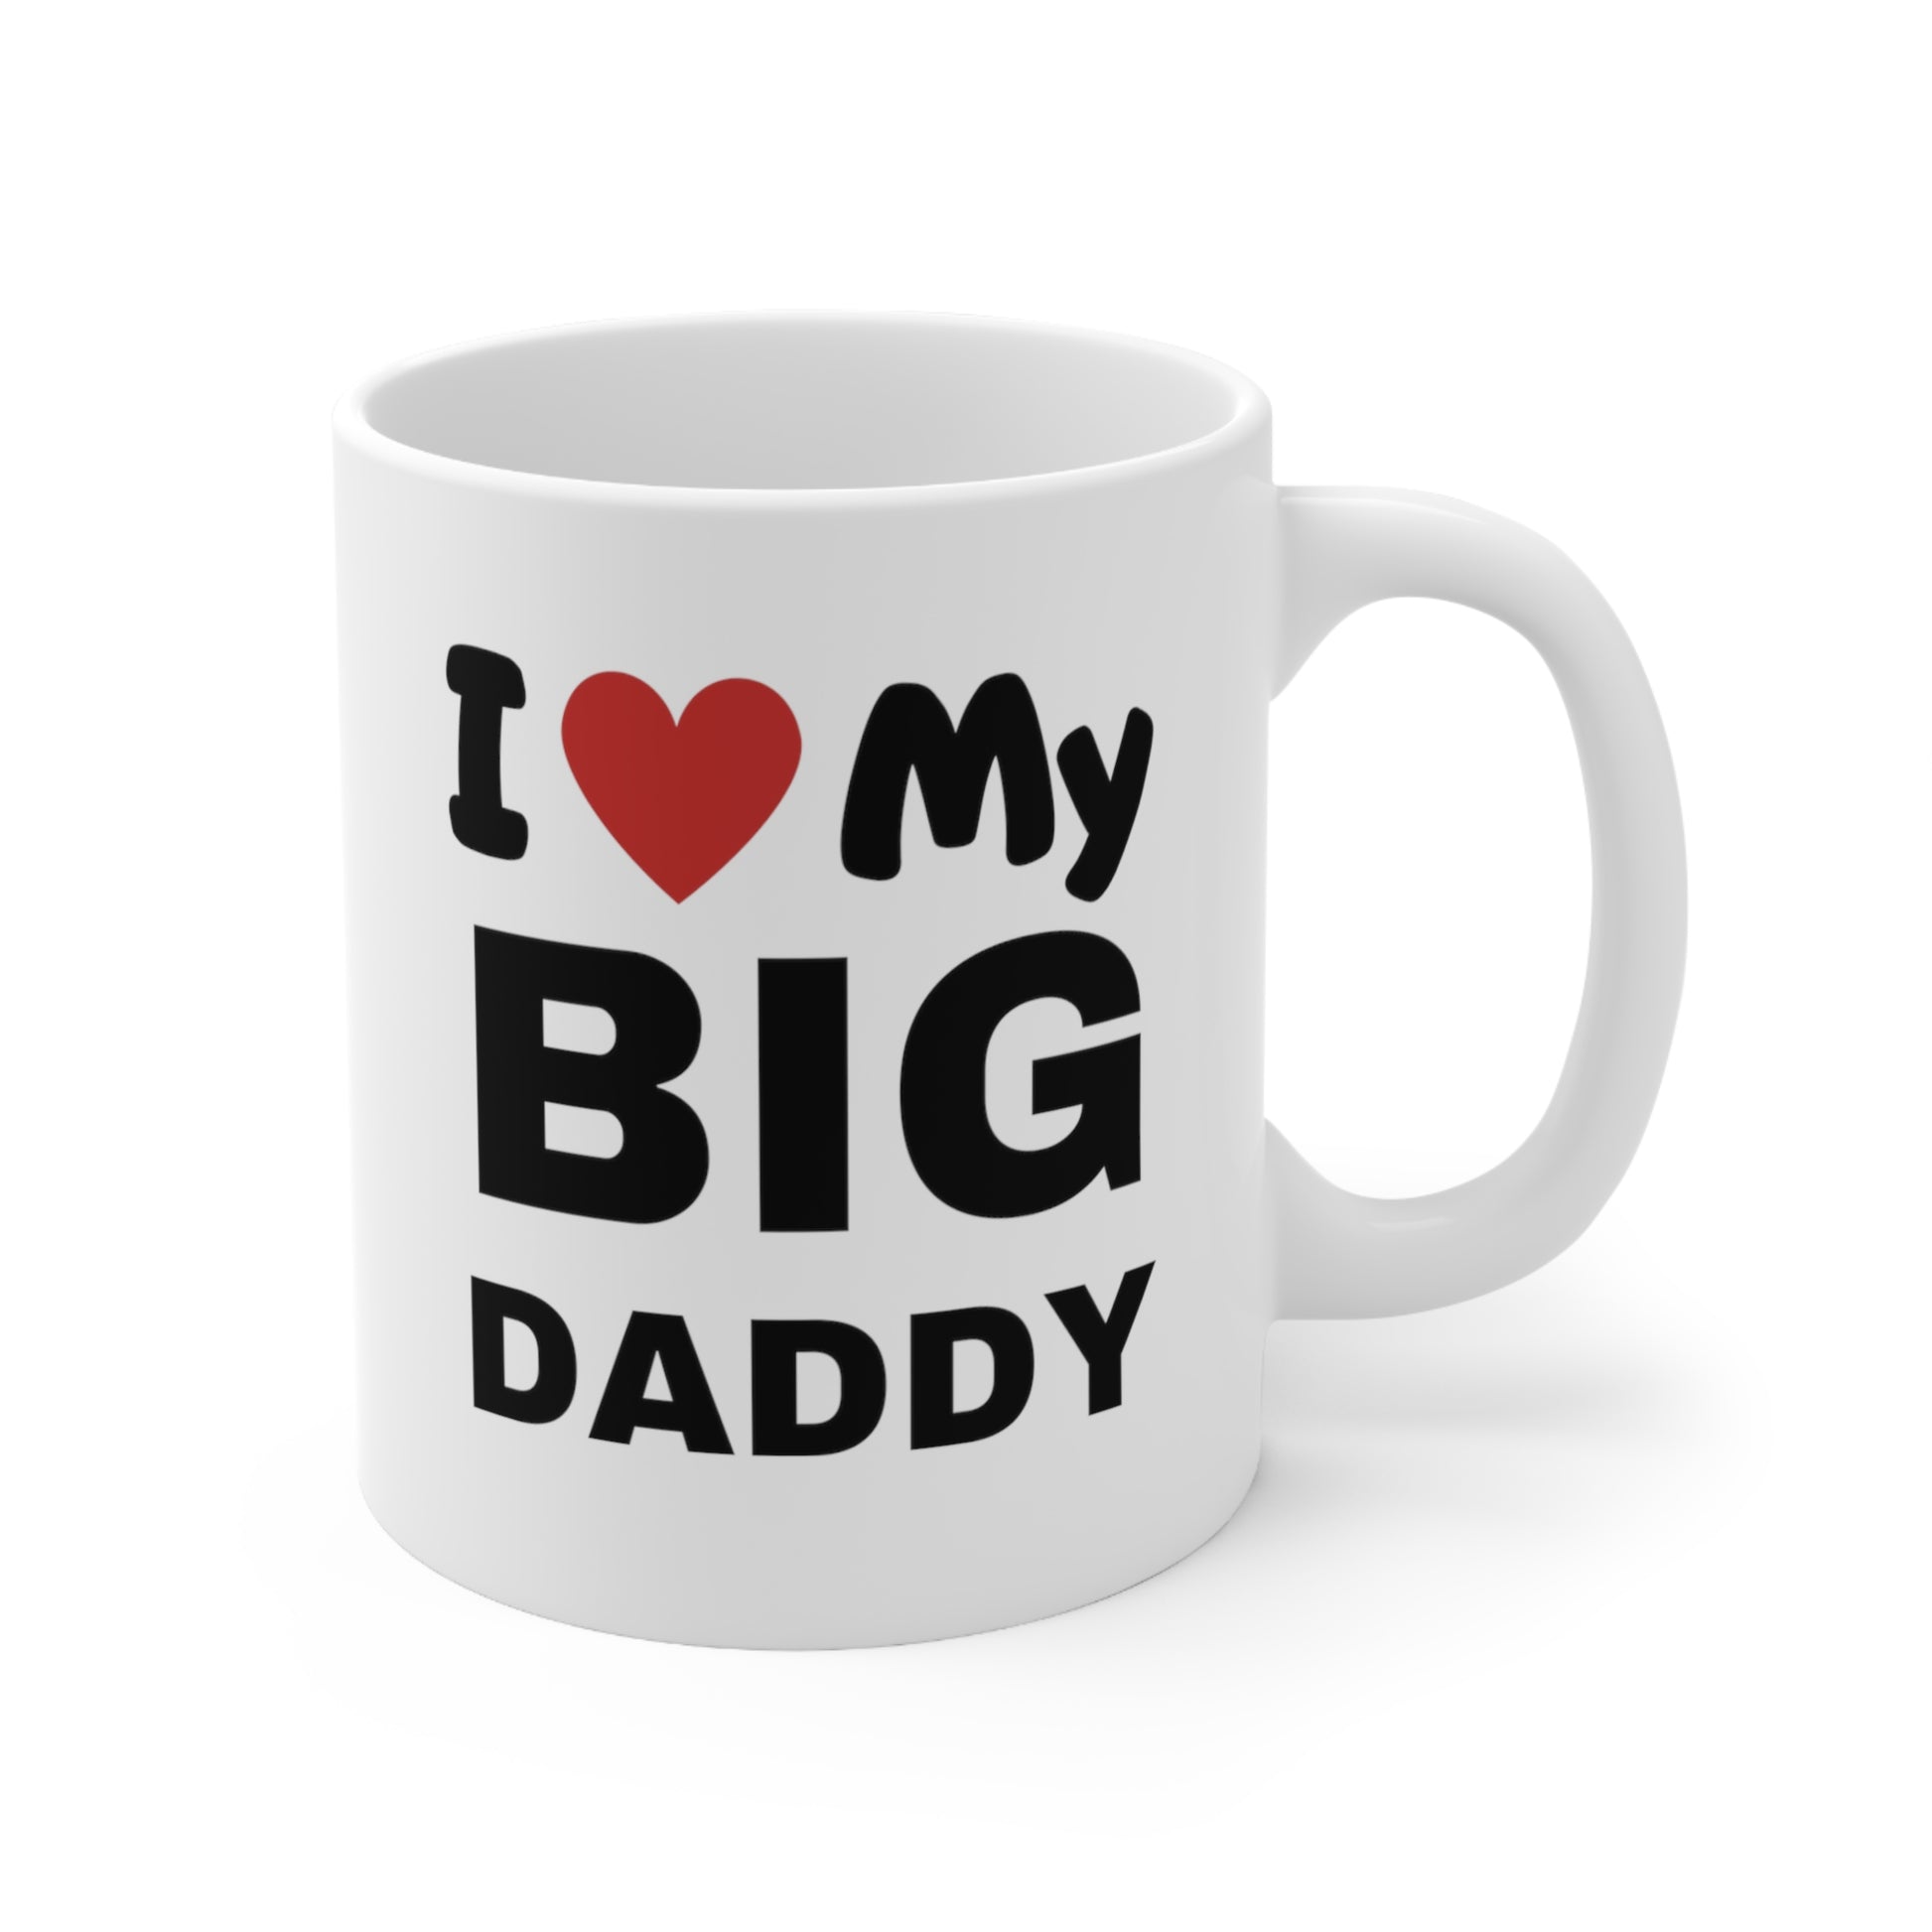 I Love My Big Daddy Mug, Best Gifts for Father's Day